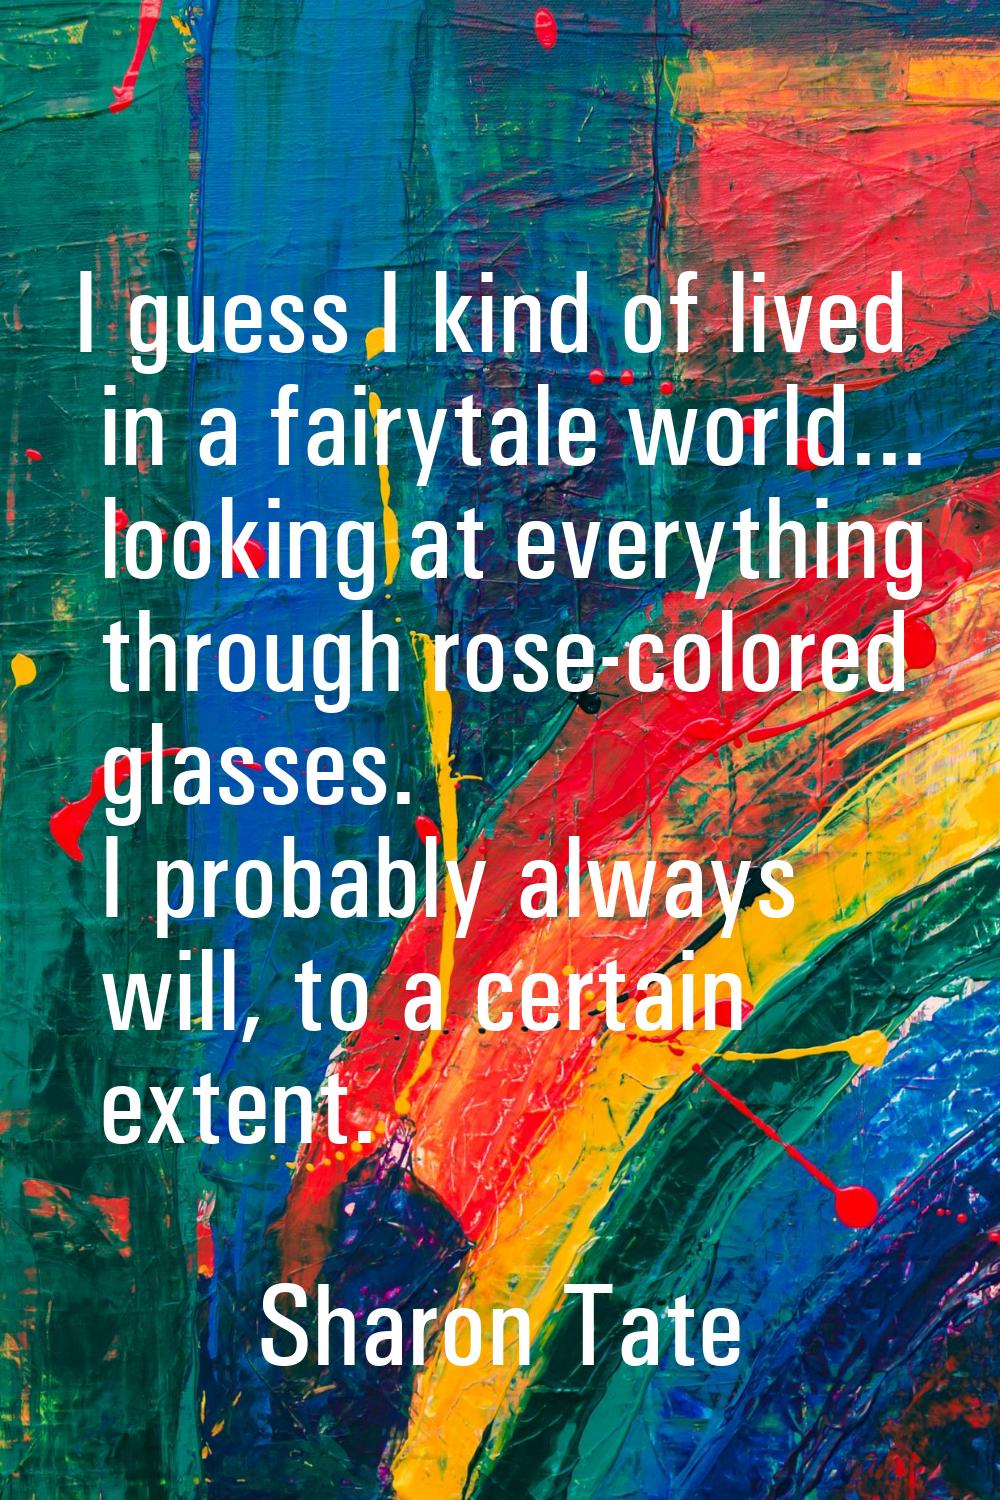 I guess I kind of lived in a fairytale world... looking at everything through rose-colored glasses.